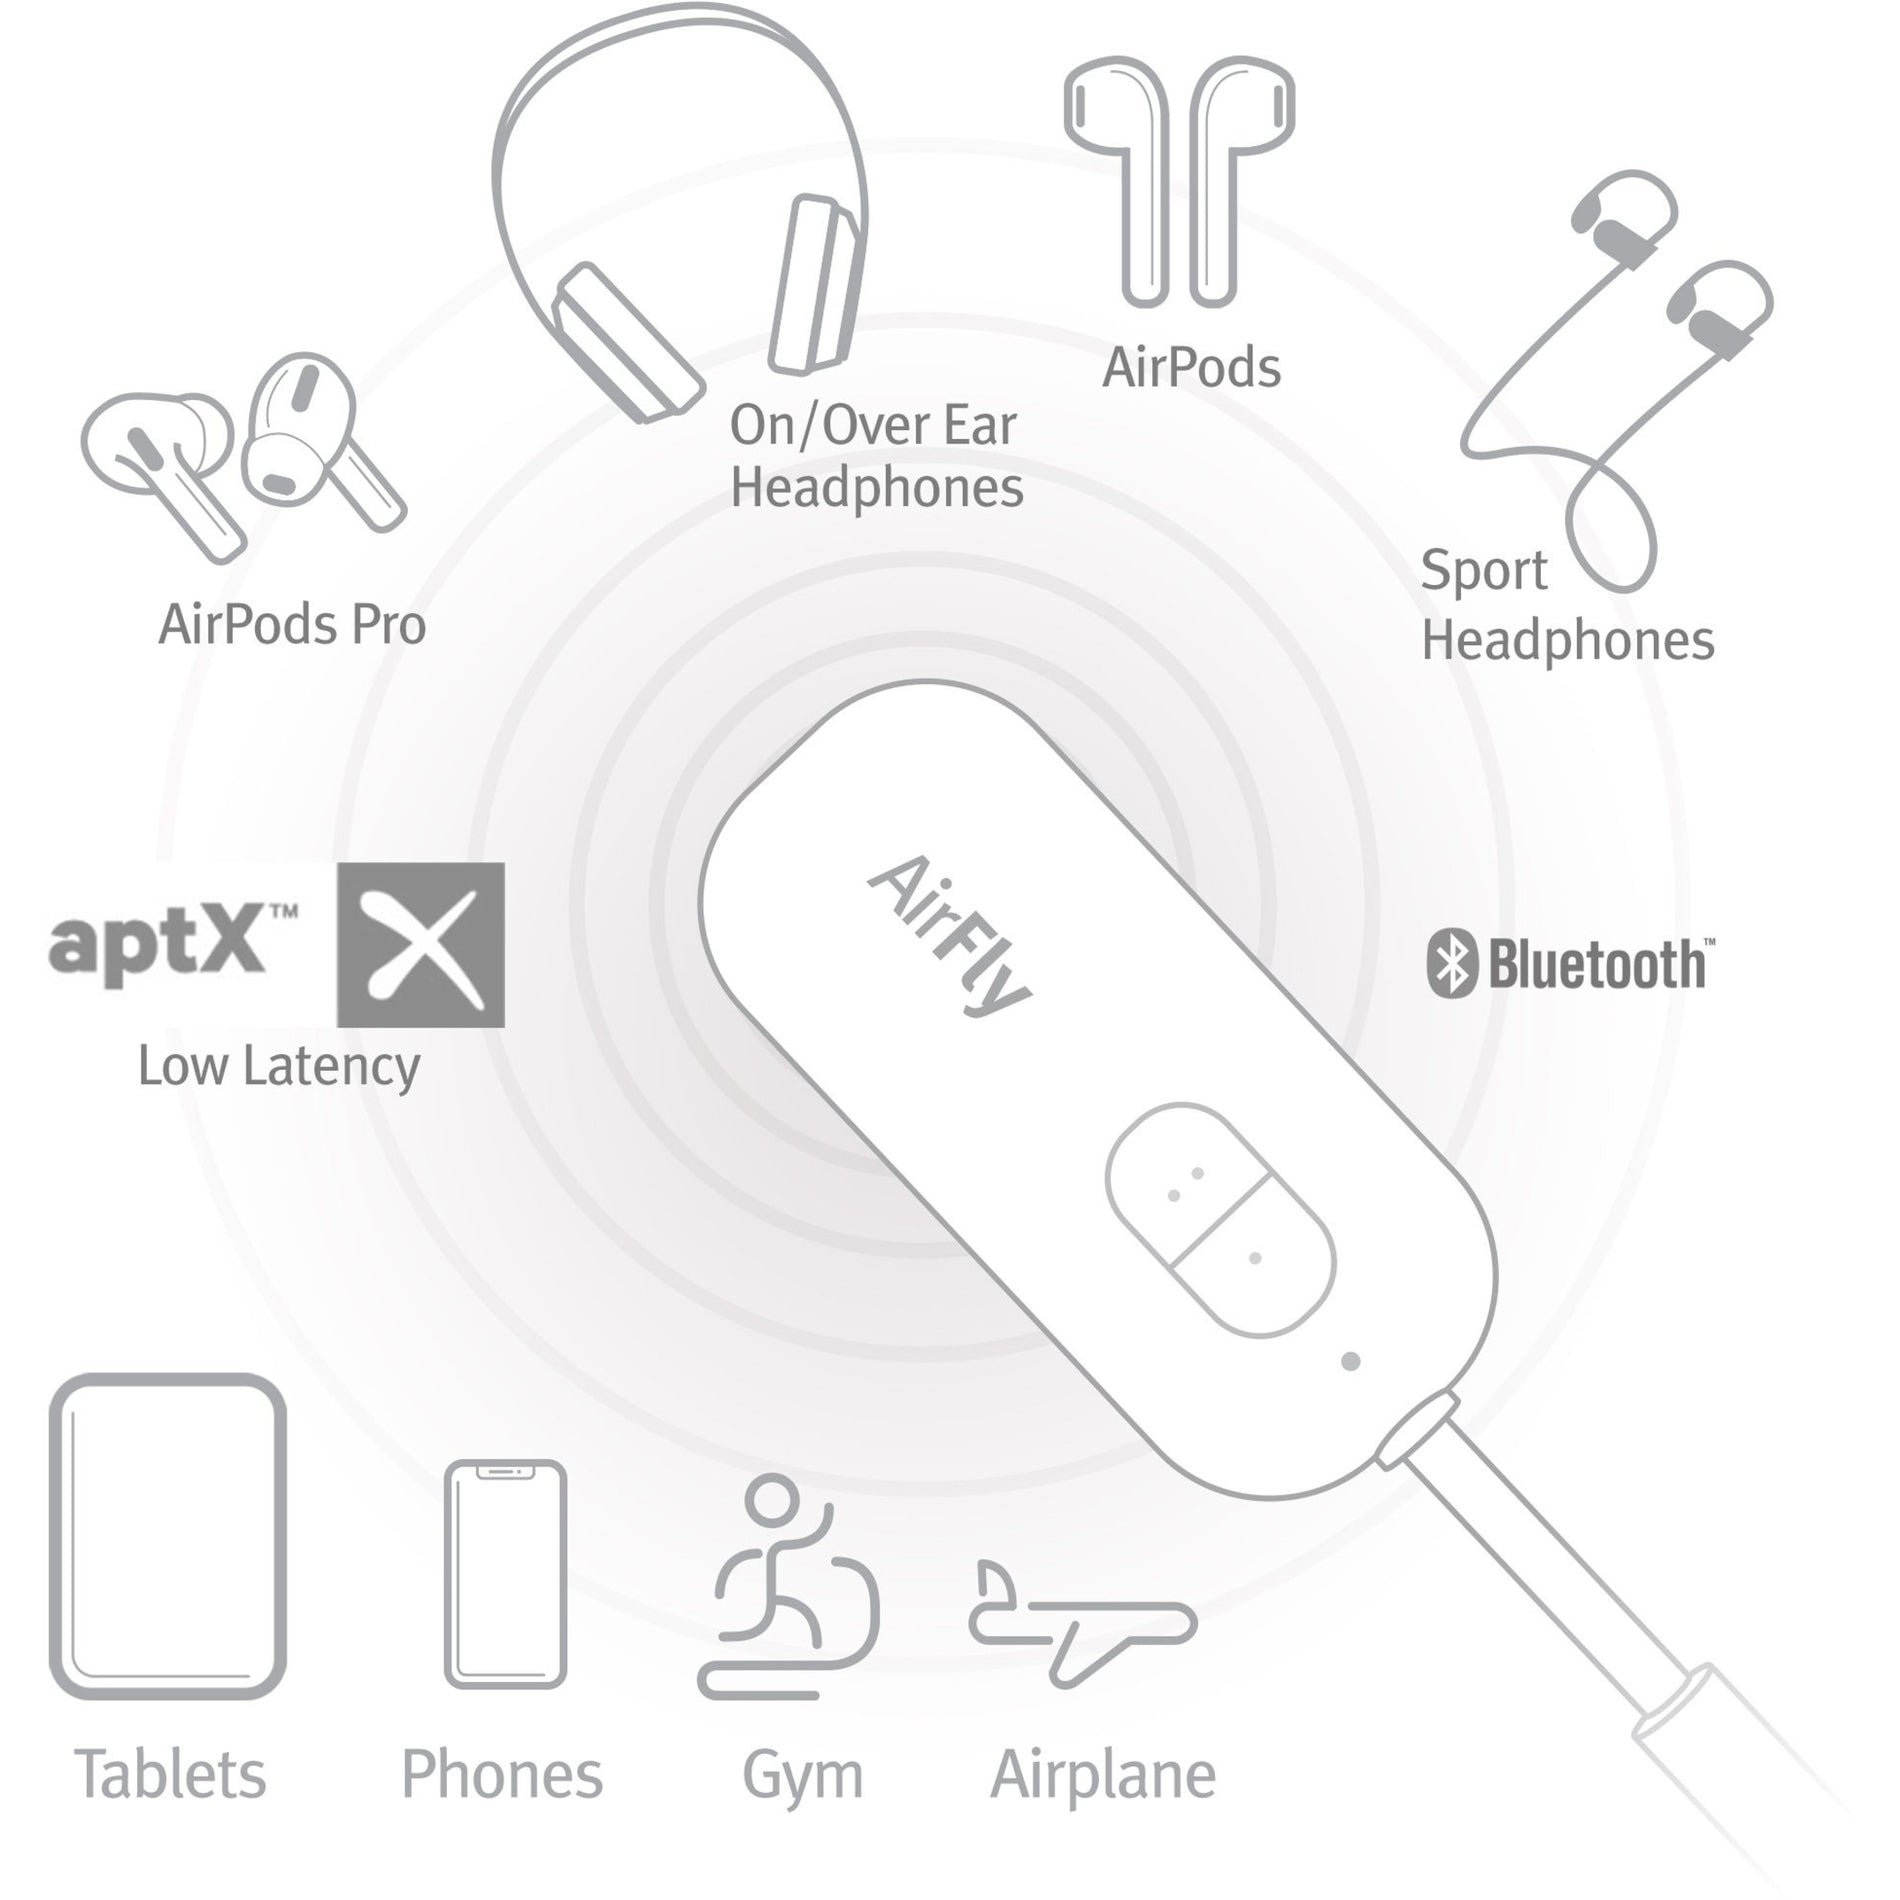 AirFly, AirFly Duo and AirFly USB-C